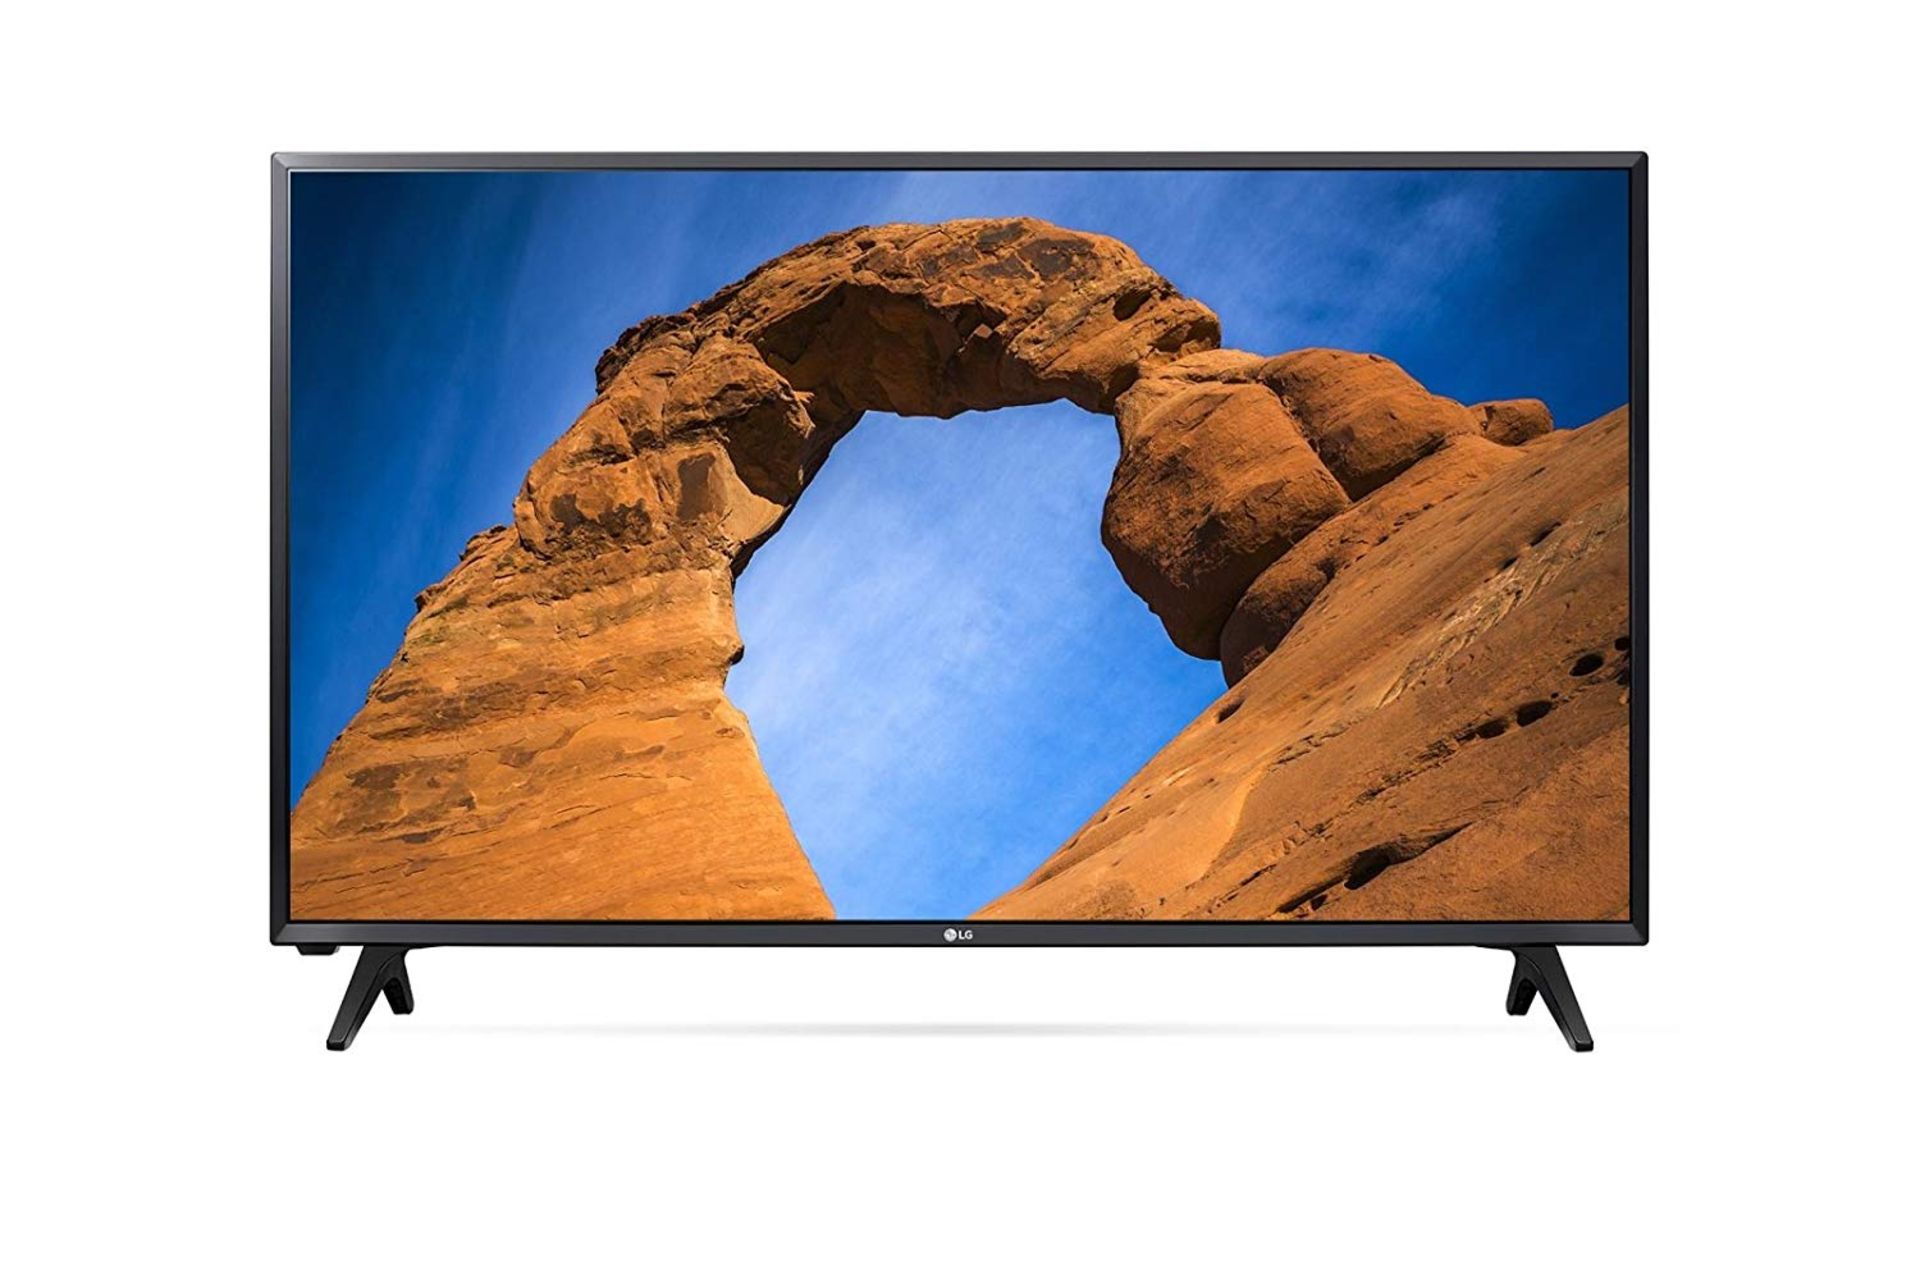 V Grade A LG 32 Inch FULL HD LED TV WITH FREEVIEW HD 32LK500BPLA